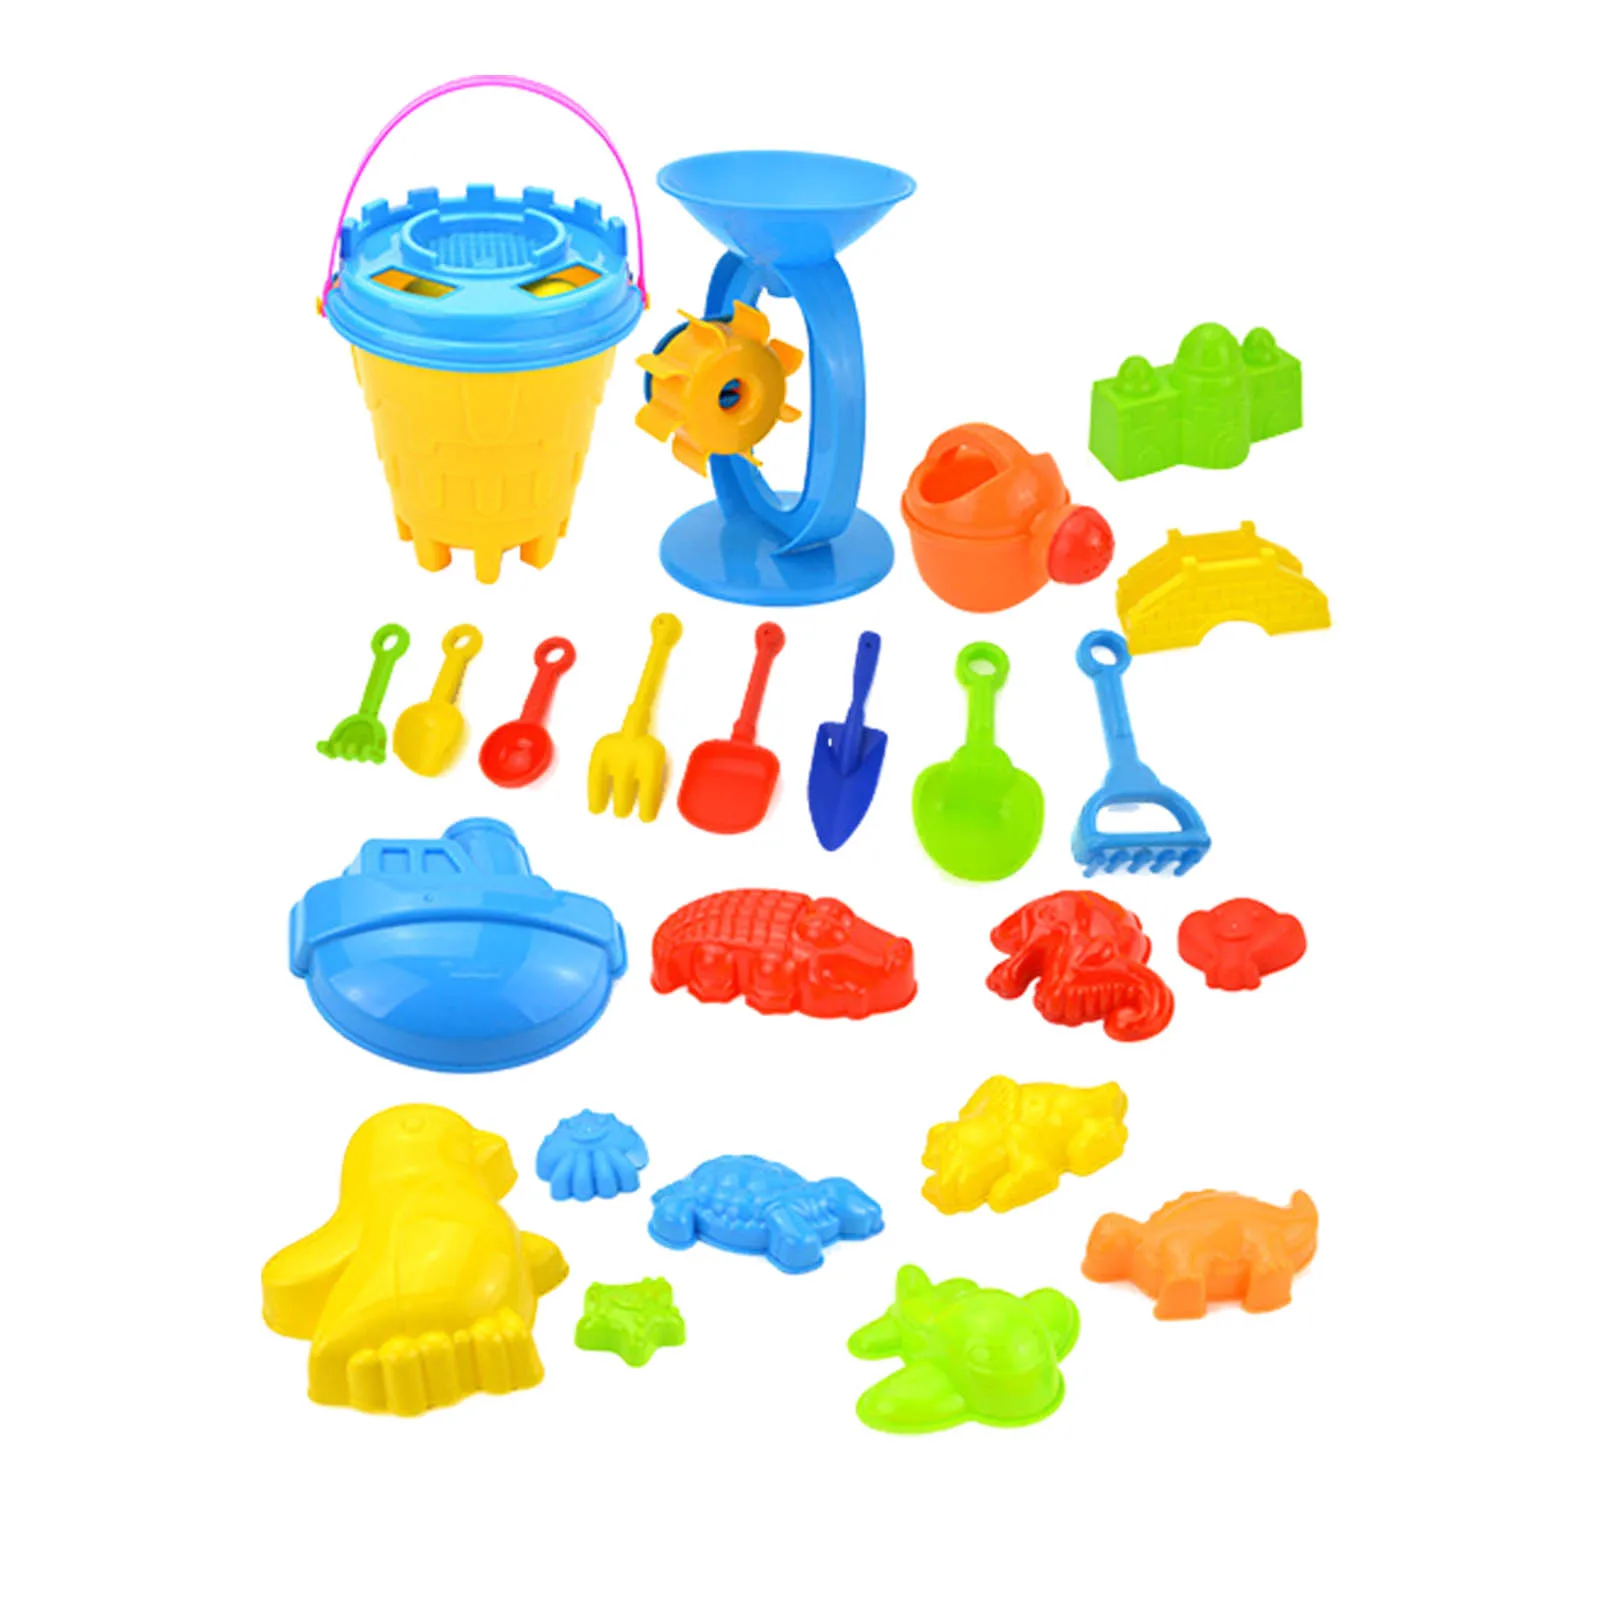 

25pcs/set Children Beach Tools Toys Colorful Plastic Hourglass Sand Bucket Shovel Summer Outdoor Sand Playing Toy For Baby